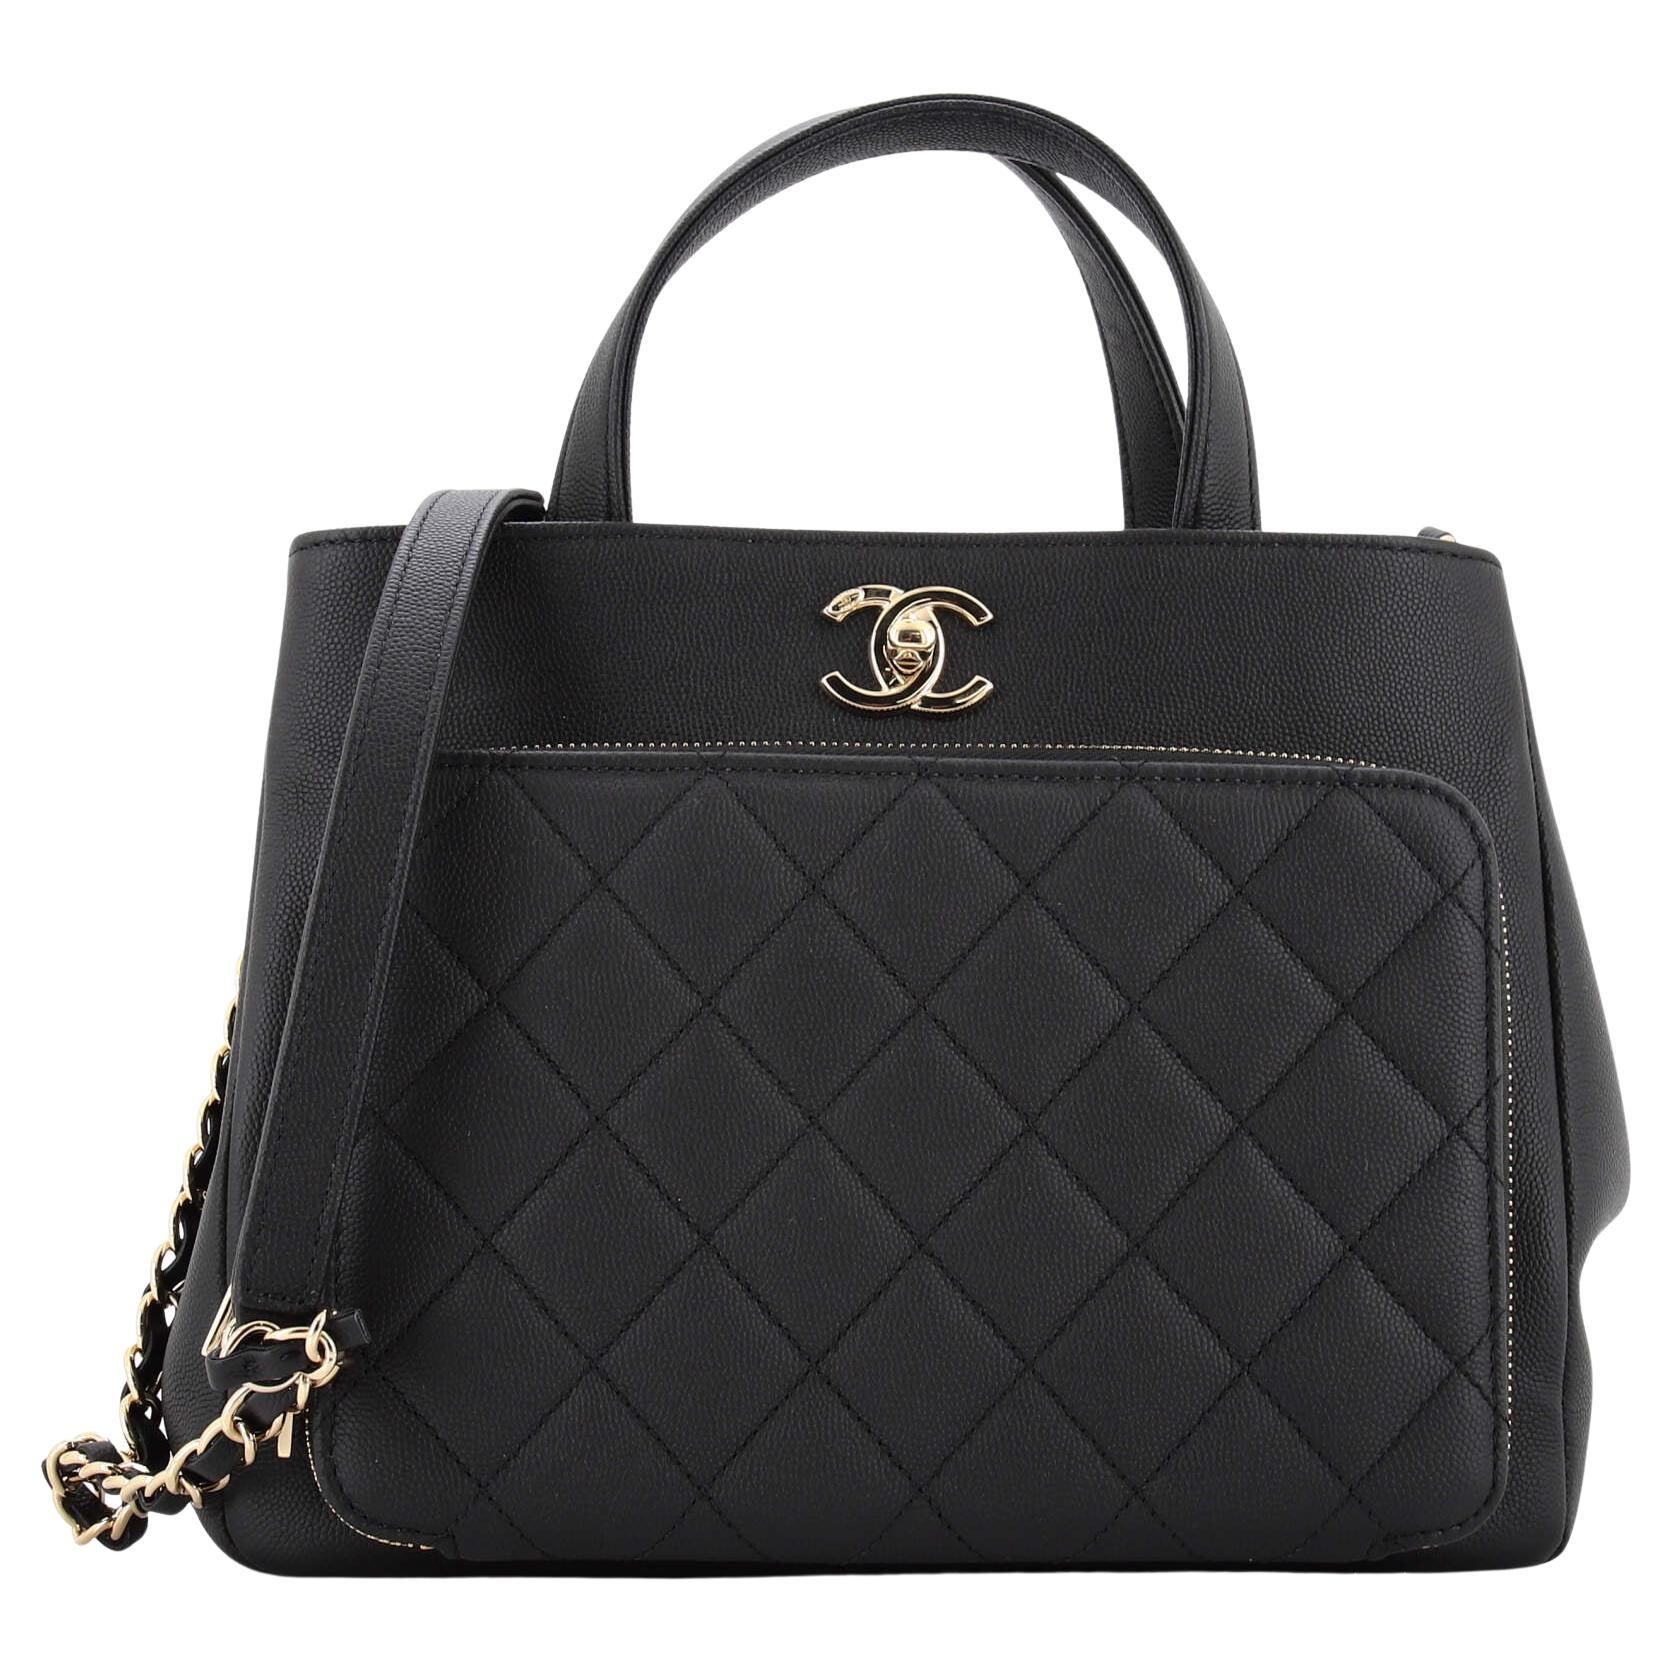 CHANEL small business affinity